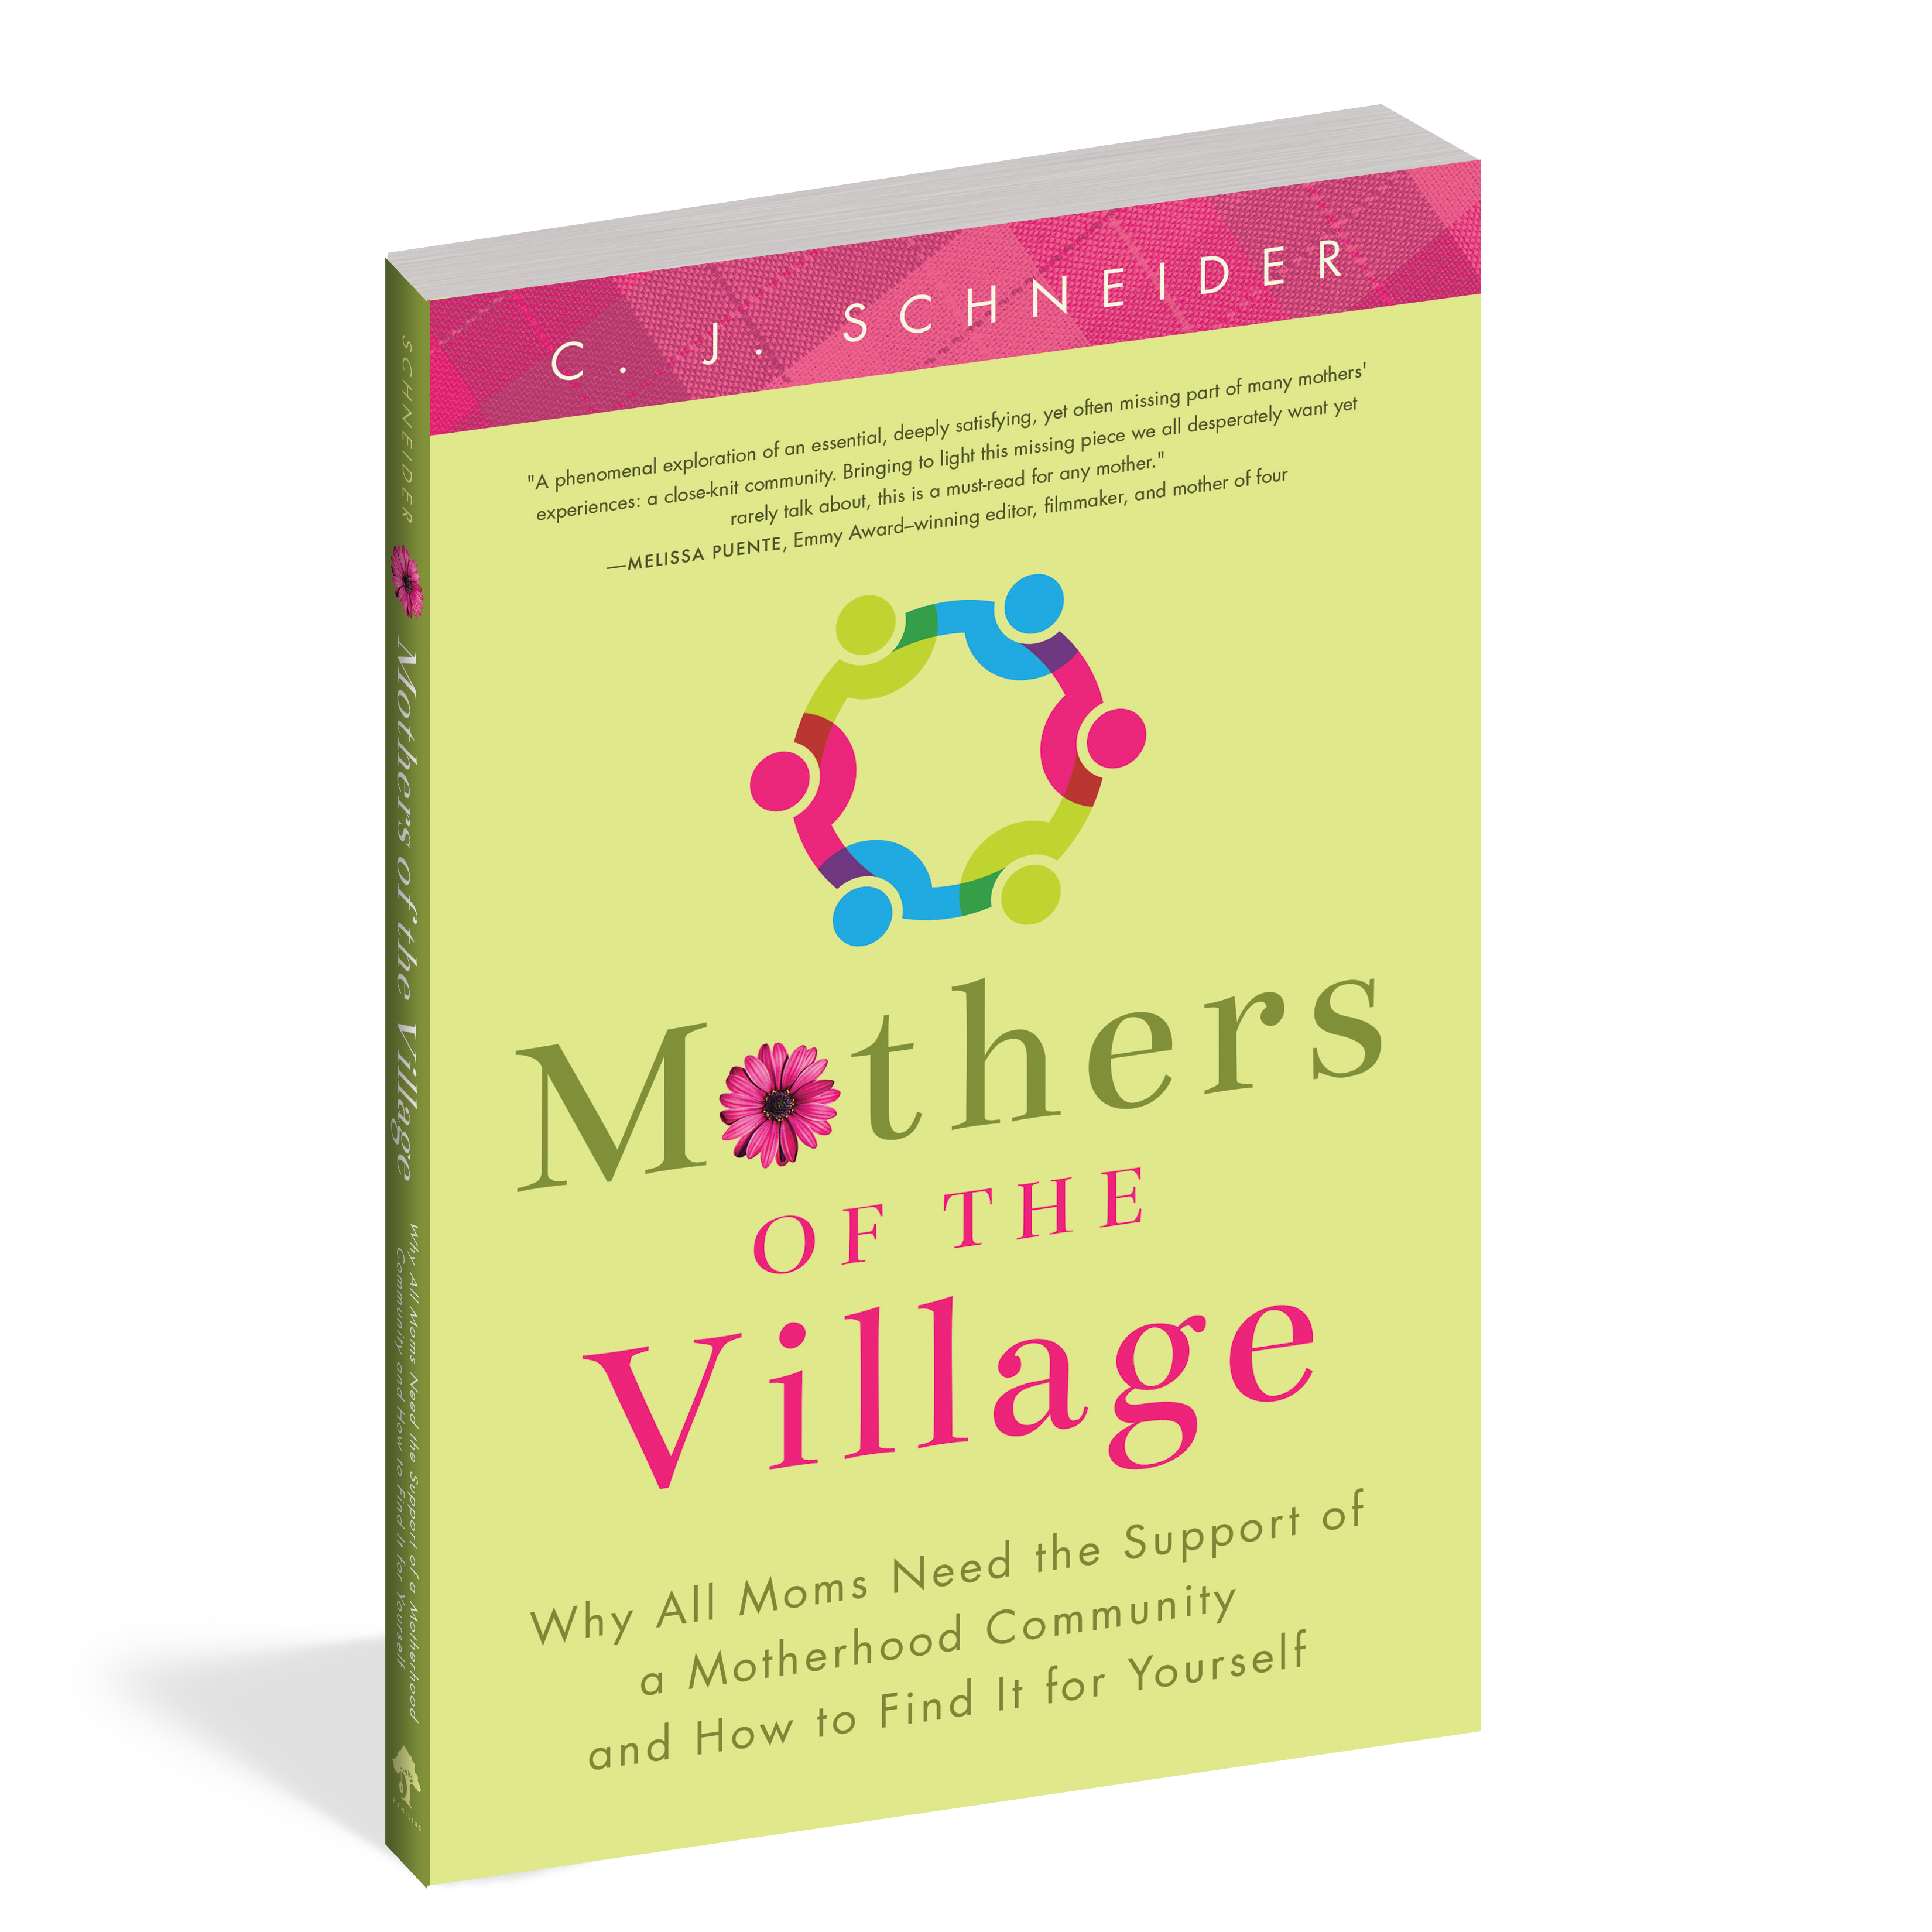 The cover of the book Mothers of the Village.